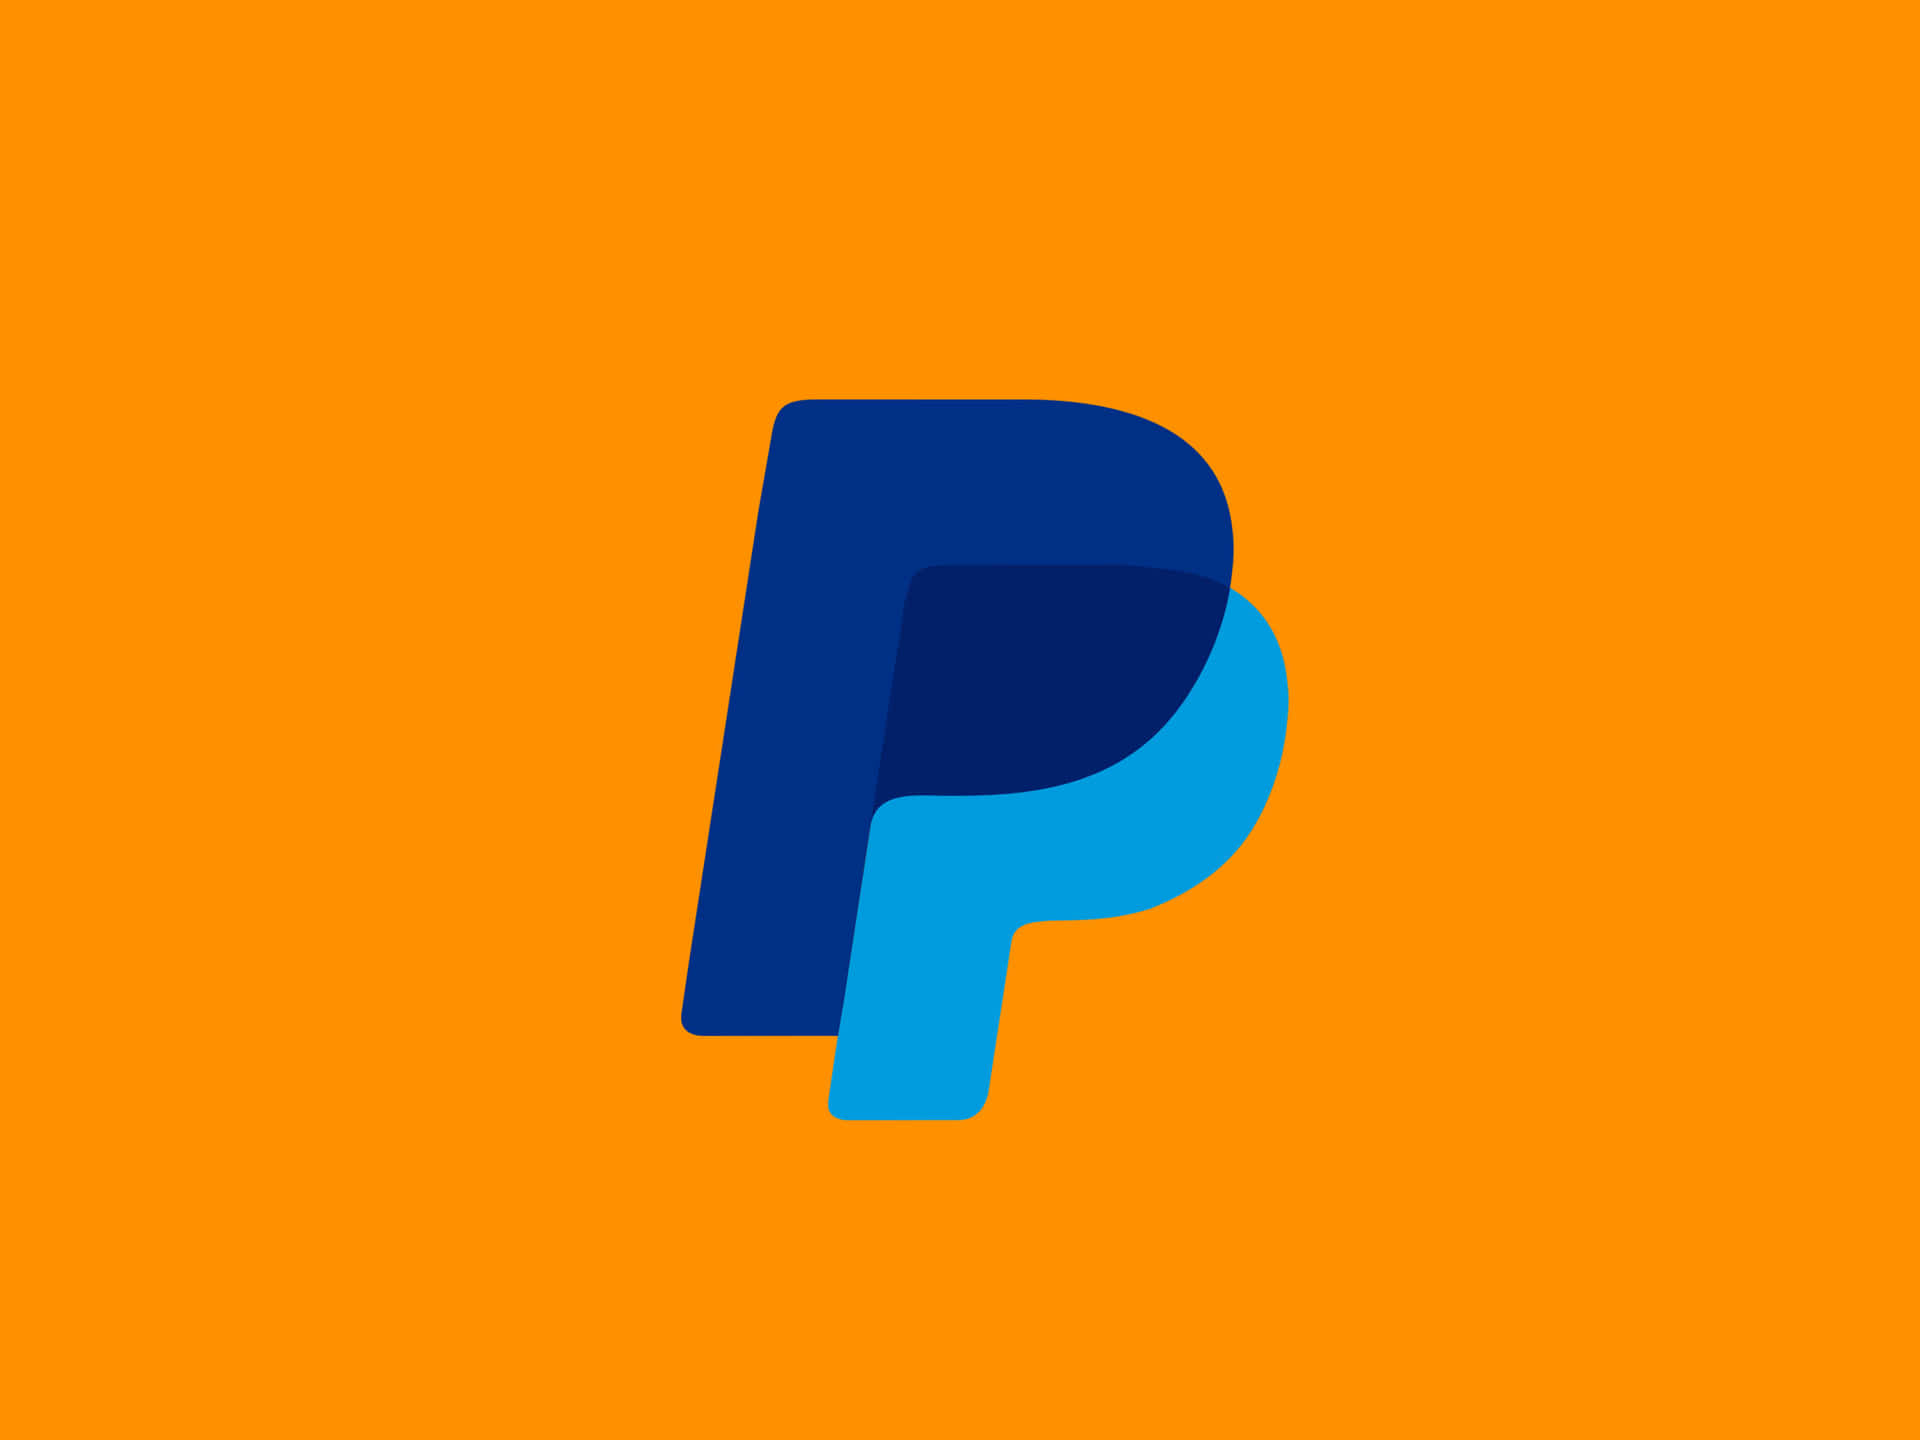 Pay With Confidence: Pay With PayPal